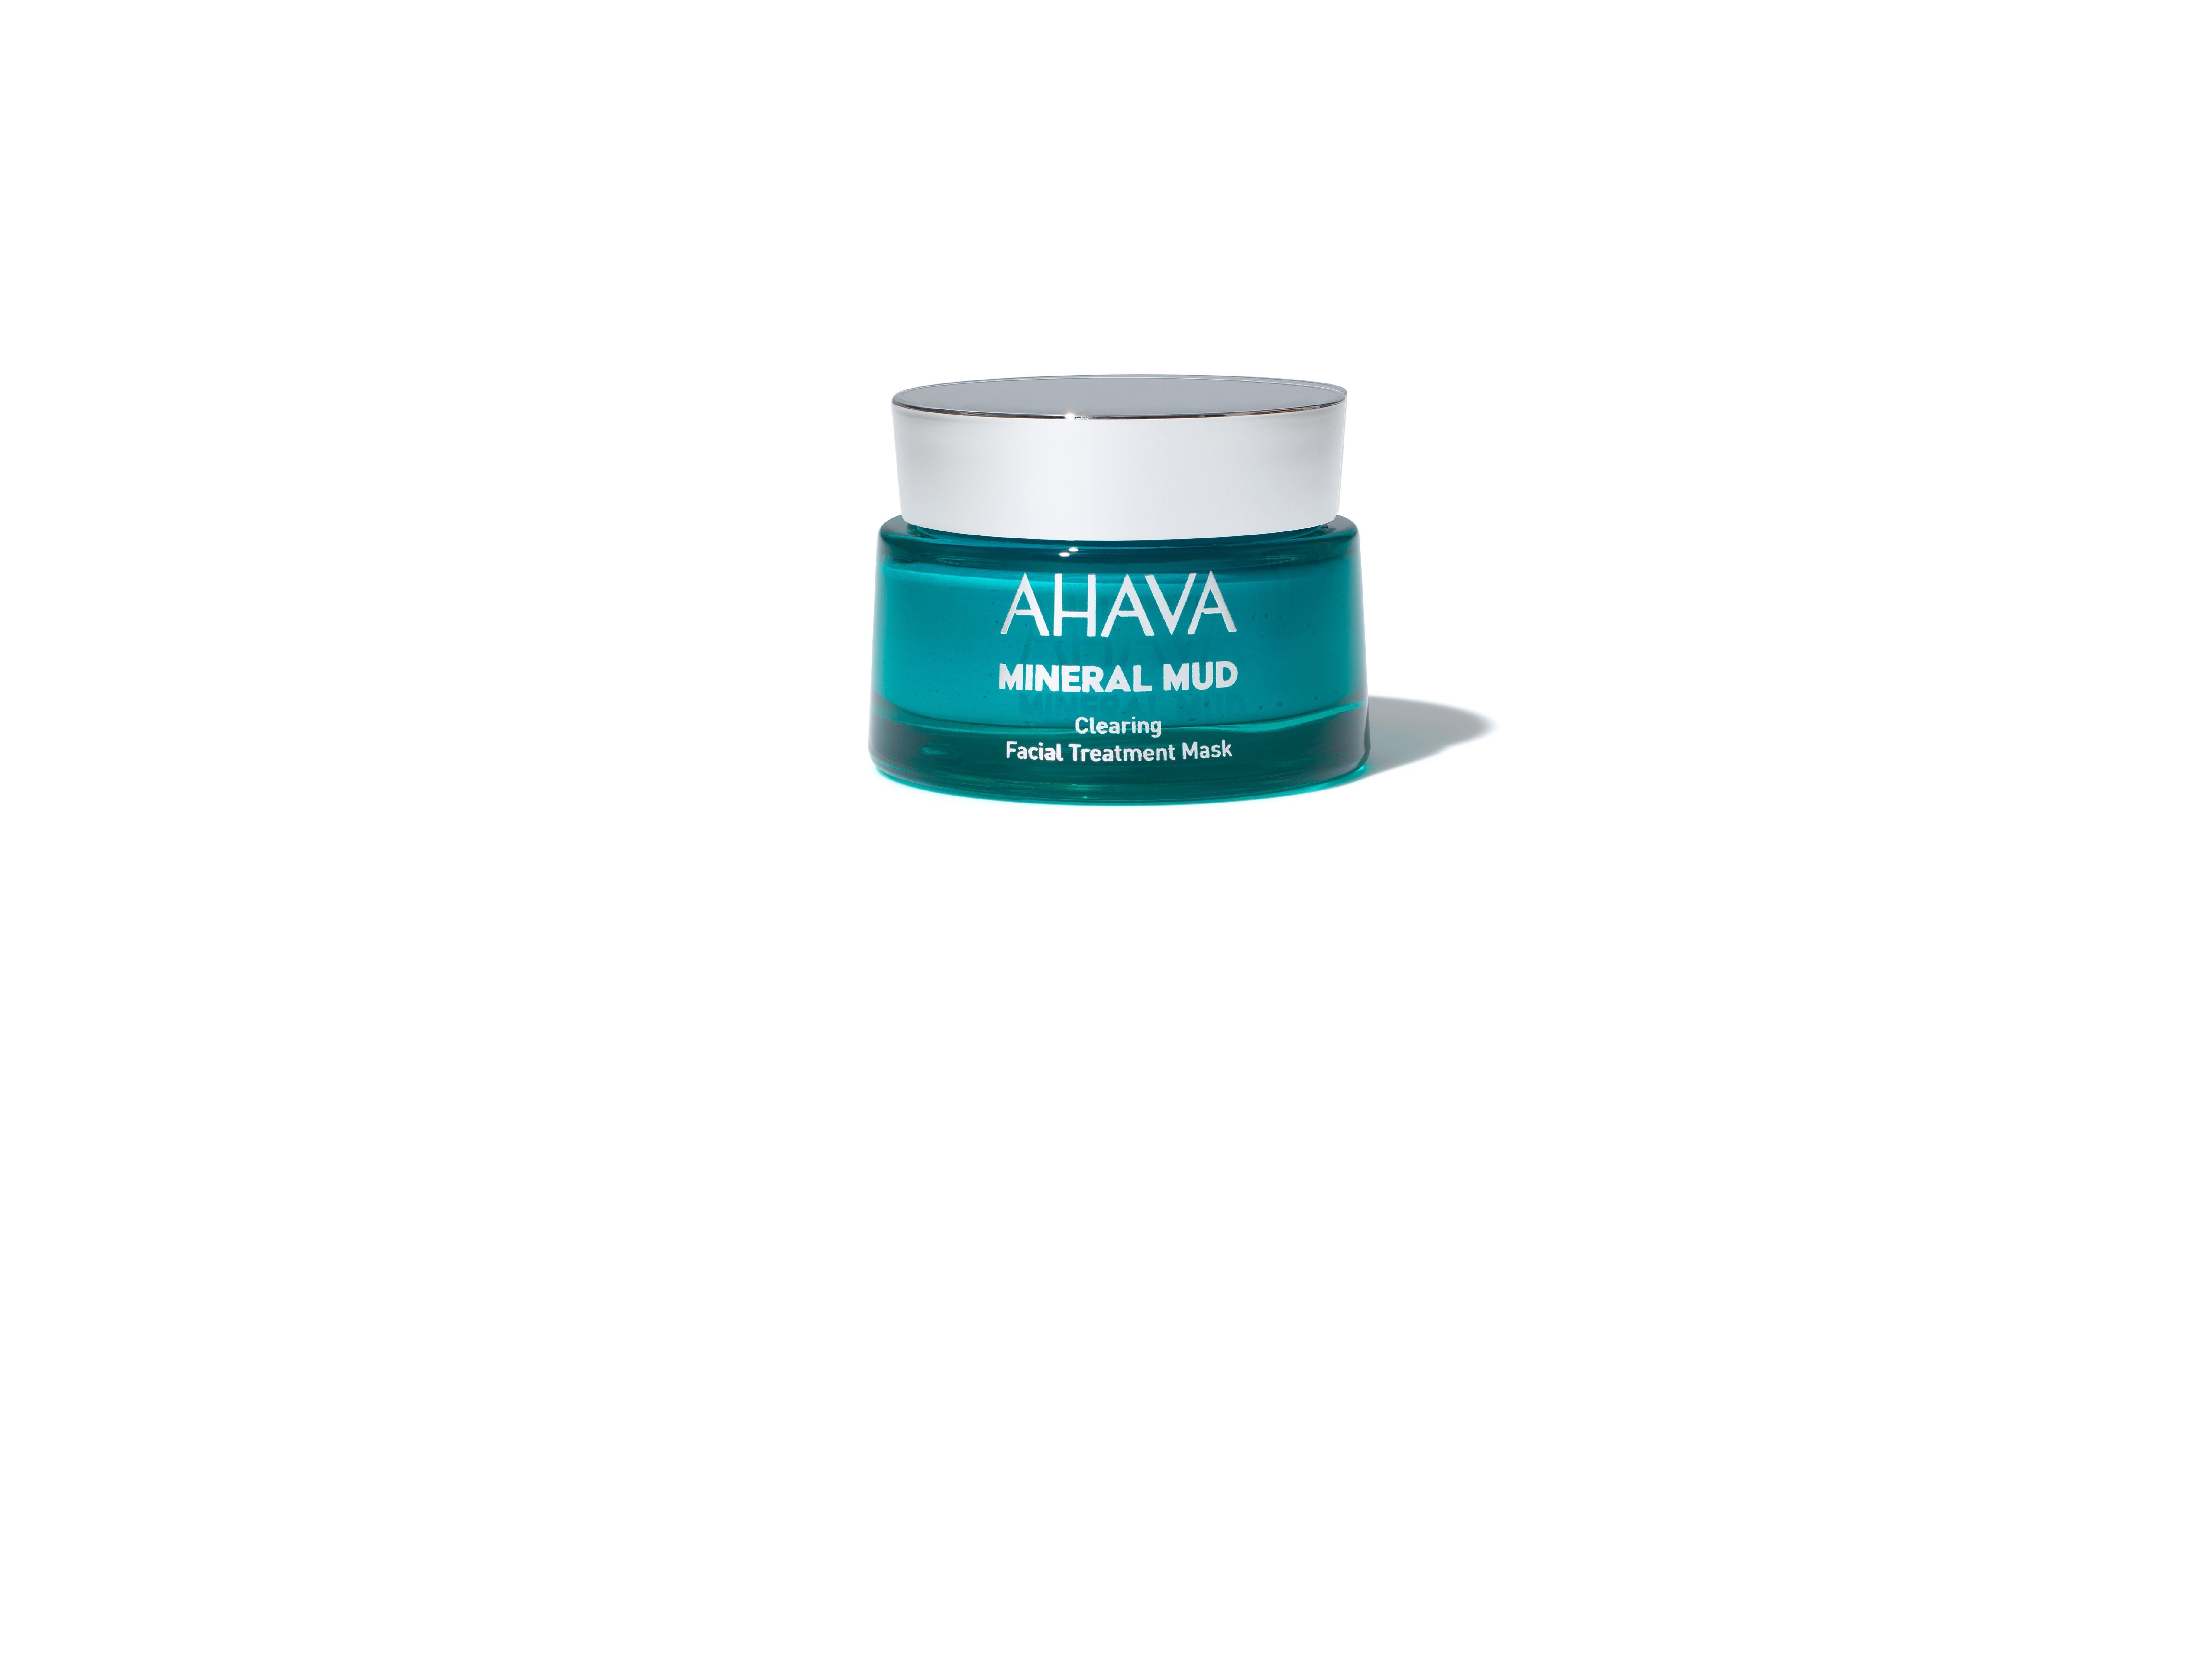 Image of AHAVA Mineral Mud Clearing Facial Treatment Mask - 50ml